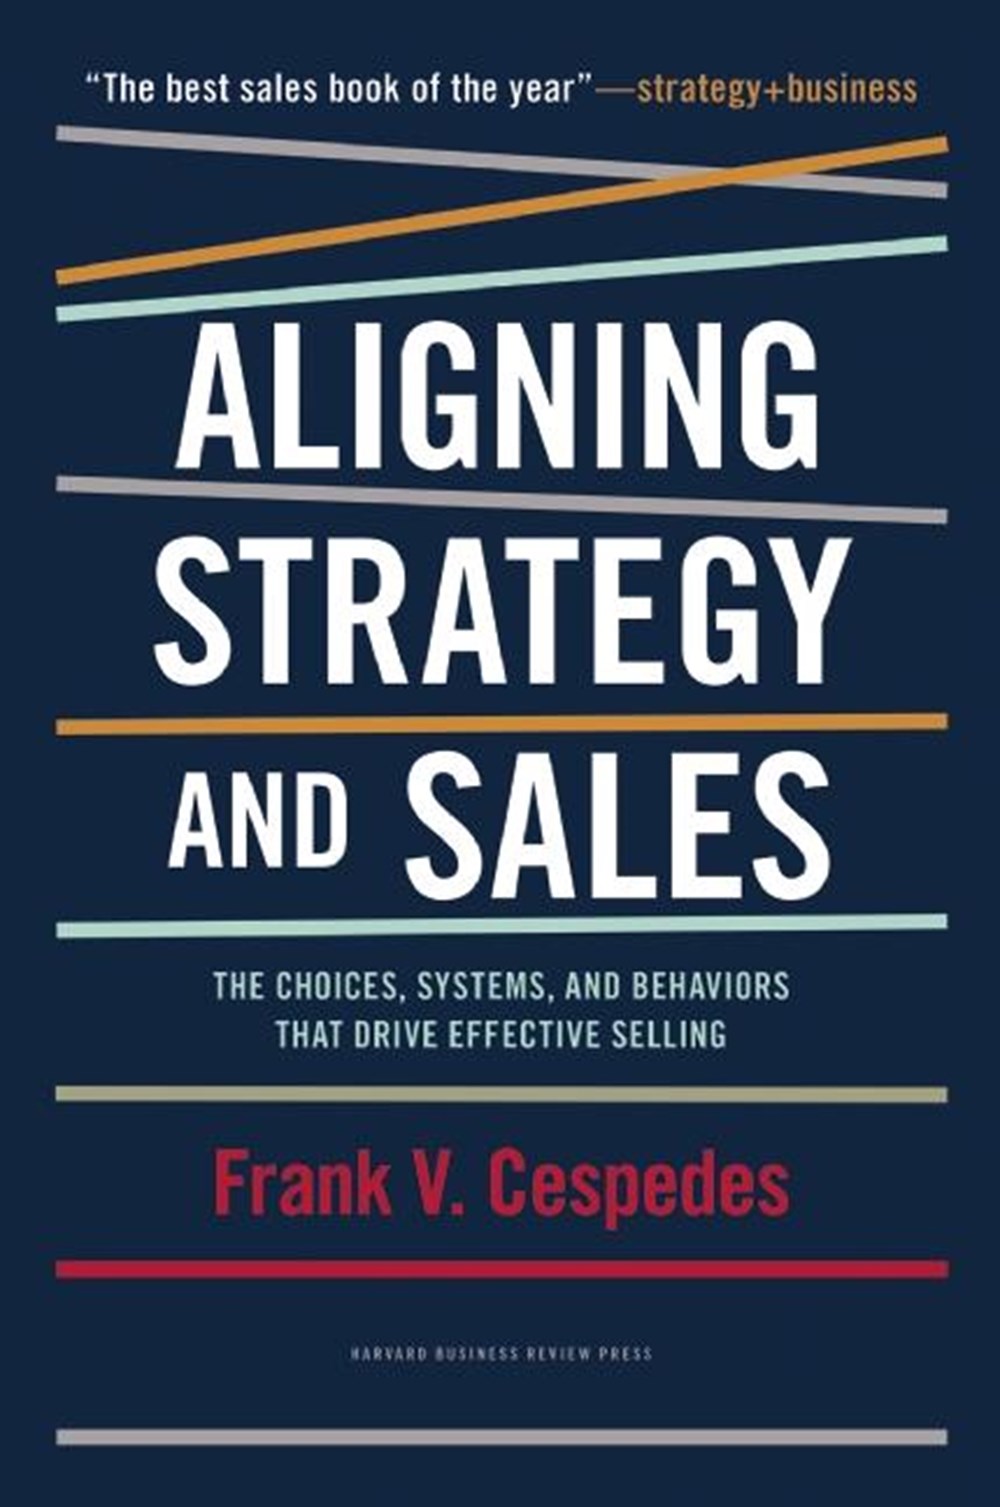 Aligning Strategy and Sales The Choices, Systems, and Behaviors That Drive Effective Selling